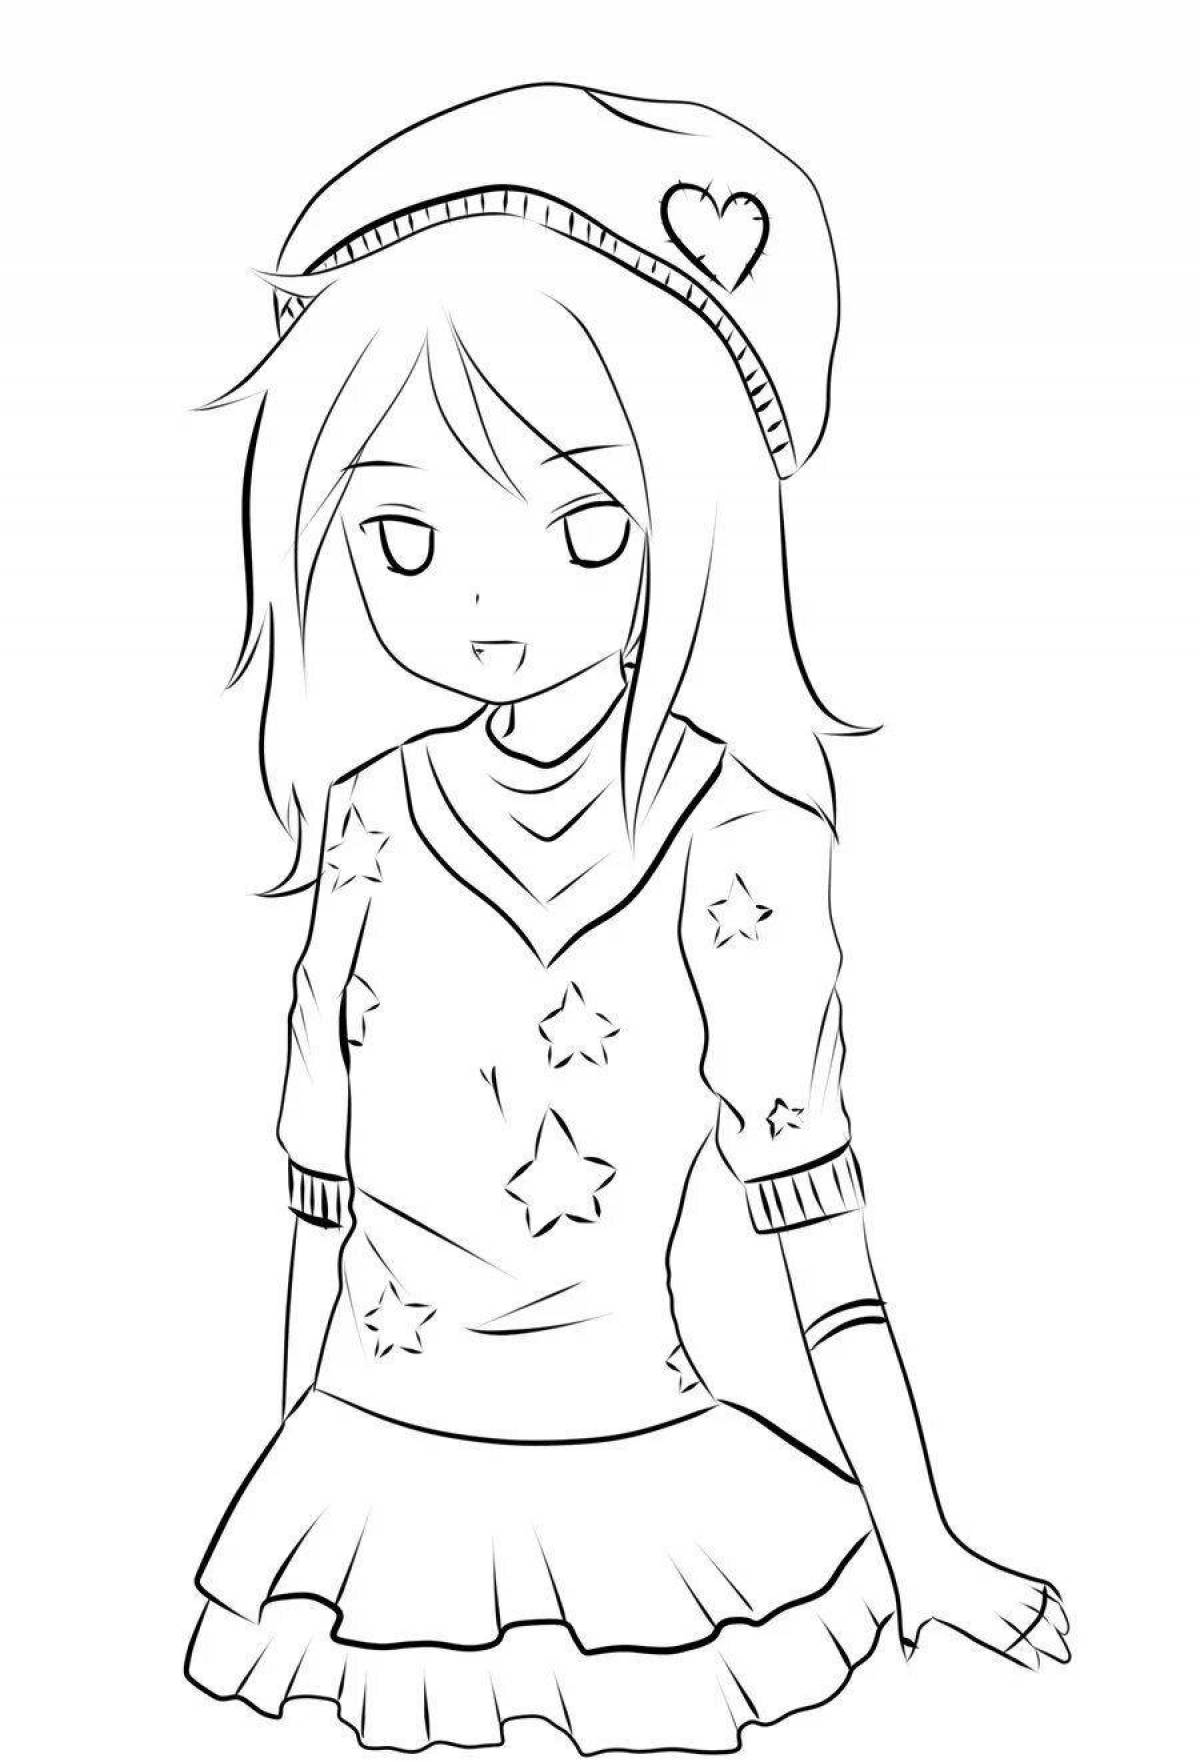 Bright anime coloring pages for girls